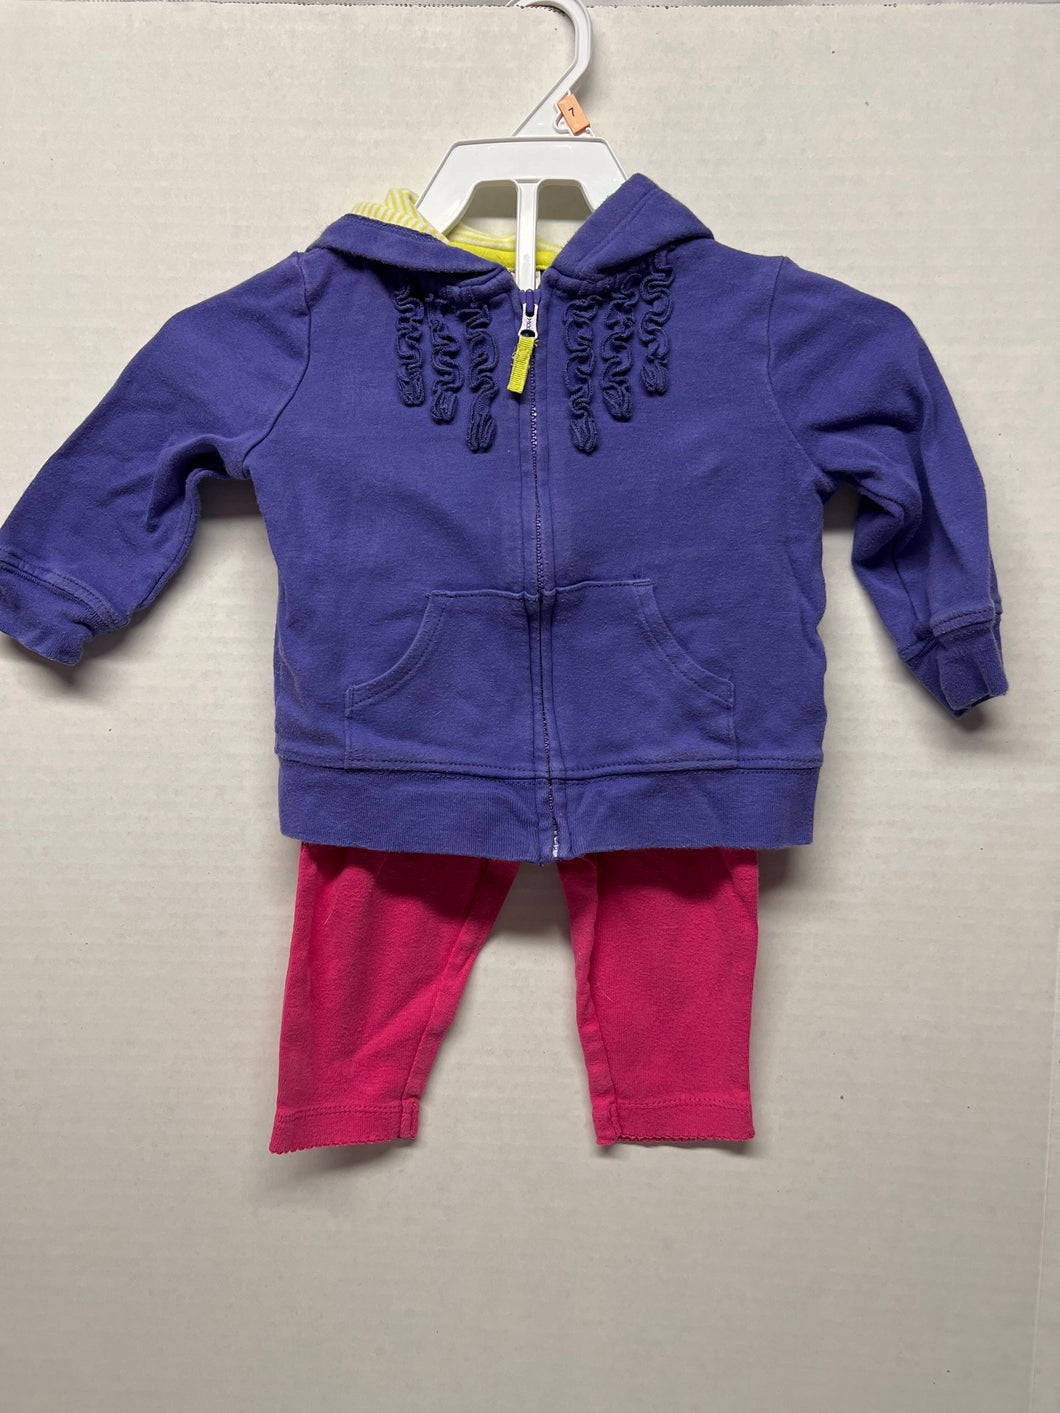 Carters two piece outfit purple zip up hoodie sweatshirt with ruffles and pink leggings 9 months